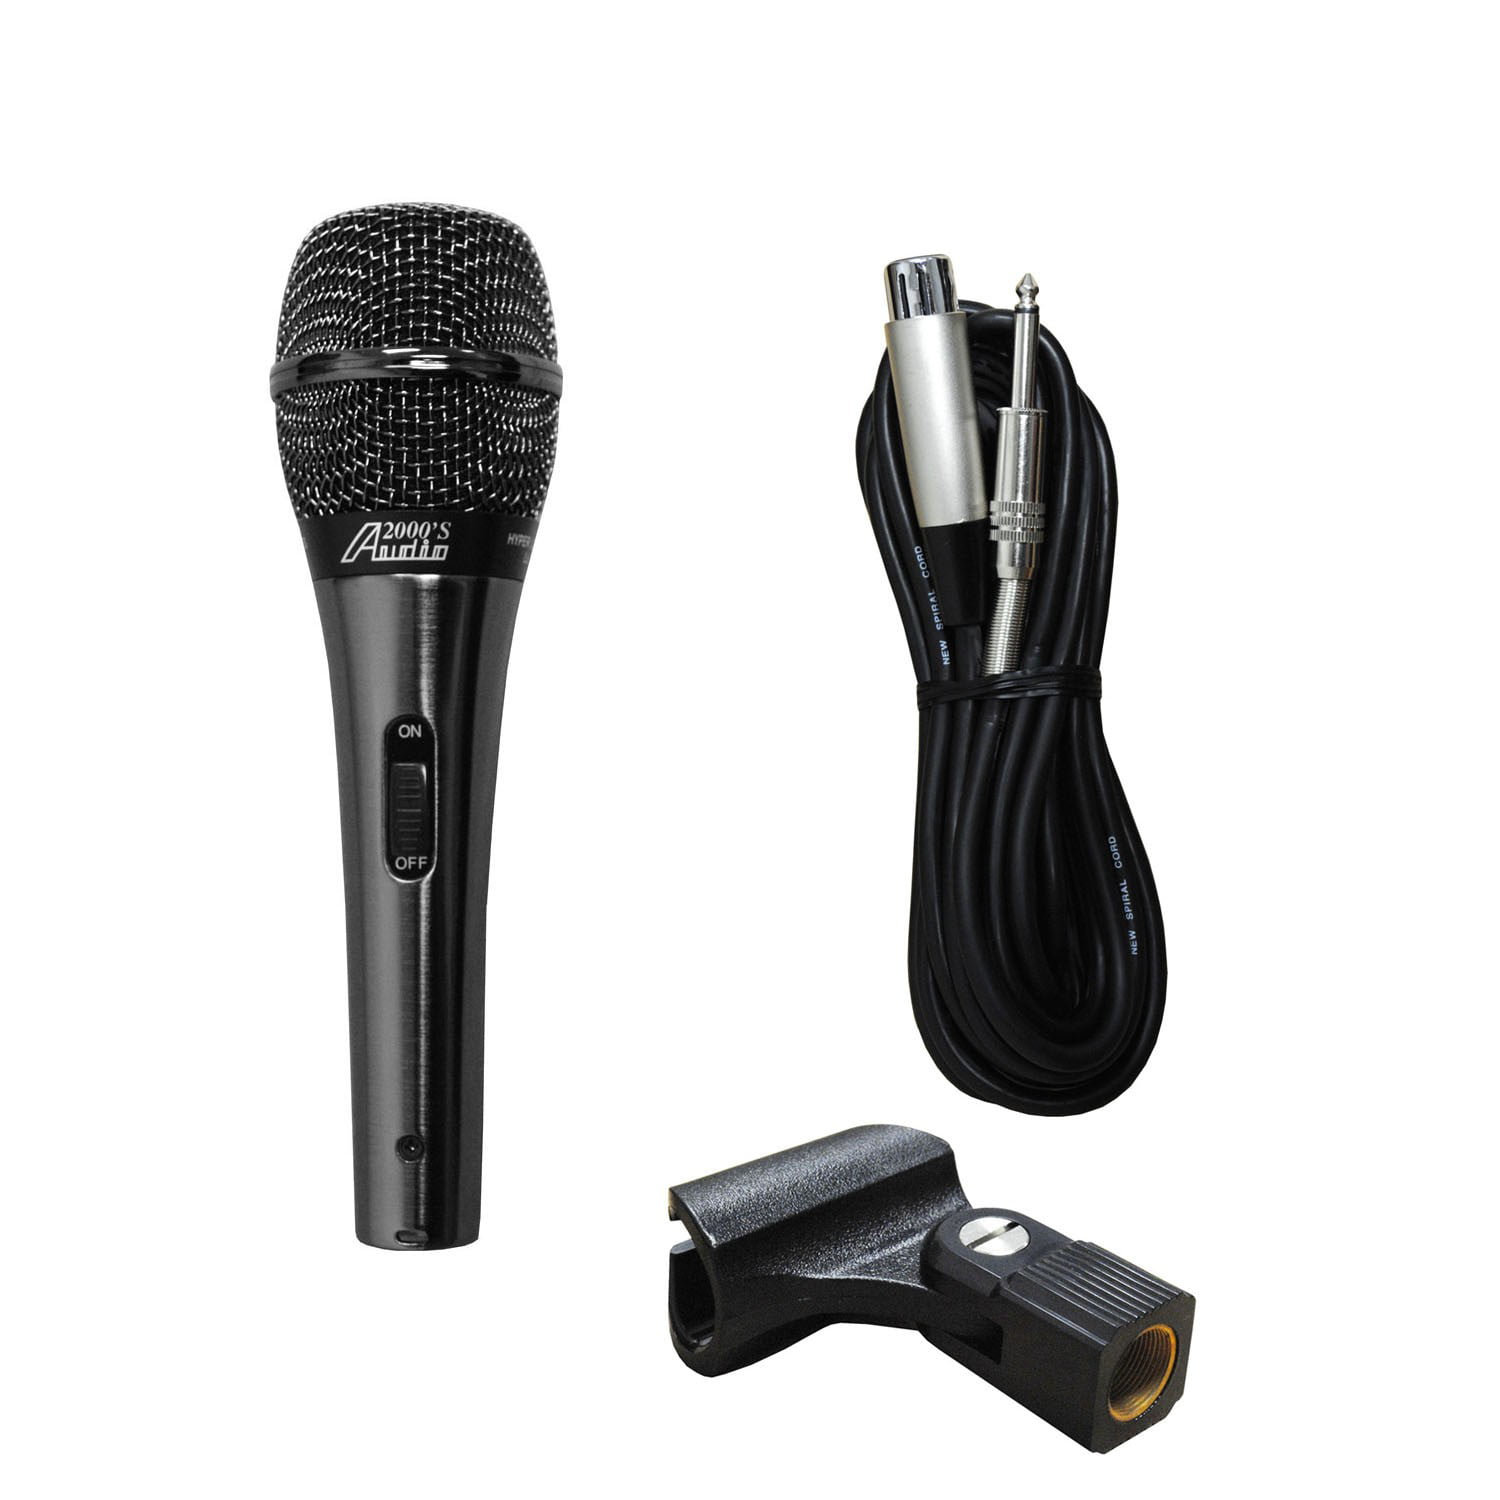 Audio2000s APM175 Dynamic Microphone With 20 feet Cable 